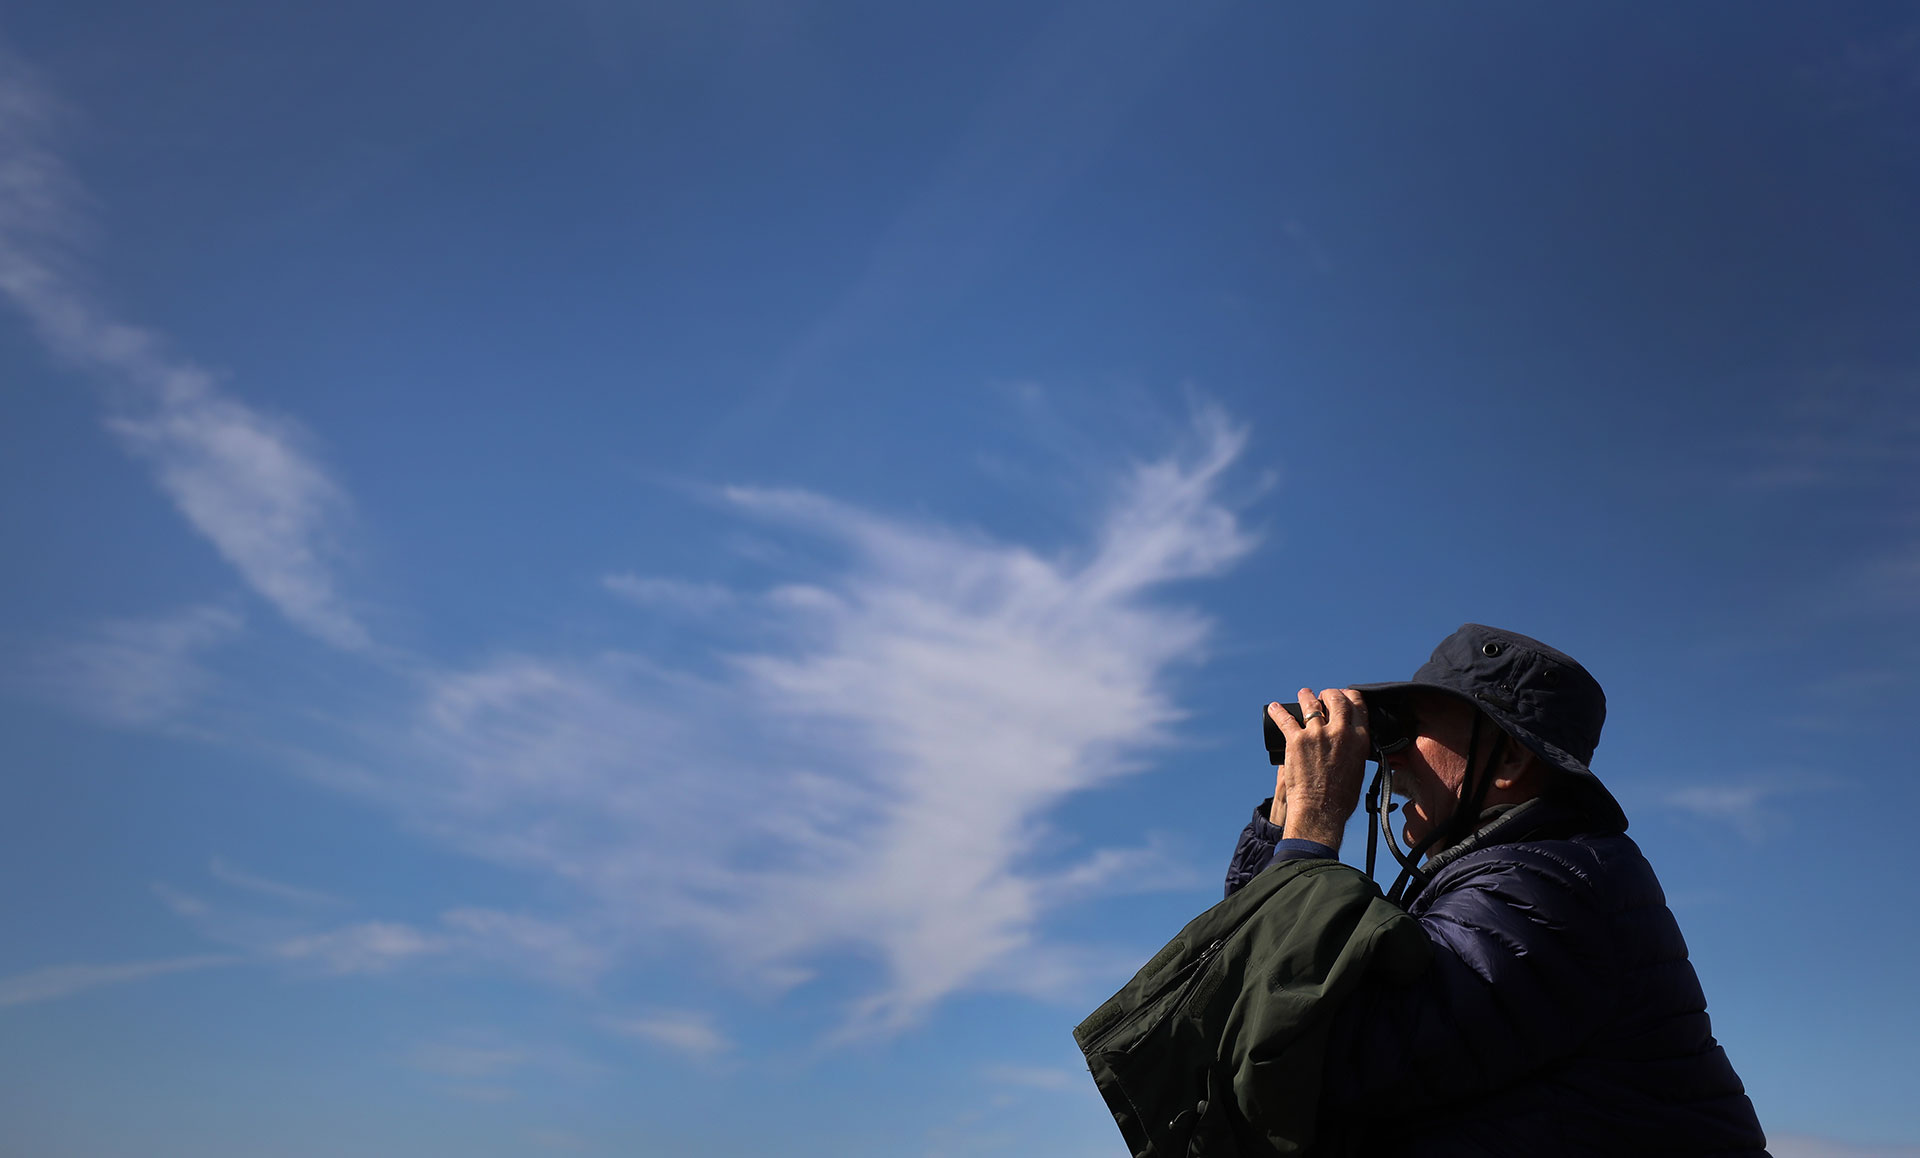 A member of the Cloud Appreciation Society spies a prime example of Cirrus, nature’s most ethereal cloud, on the Lundy, England expedition. Photo: Phil Noble / Reuters